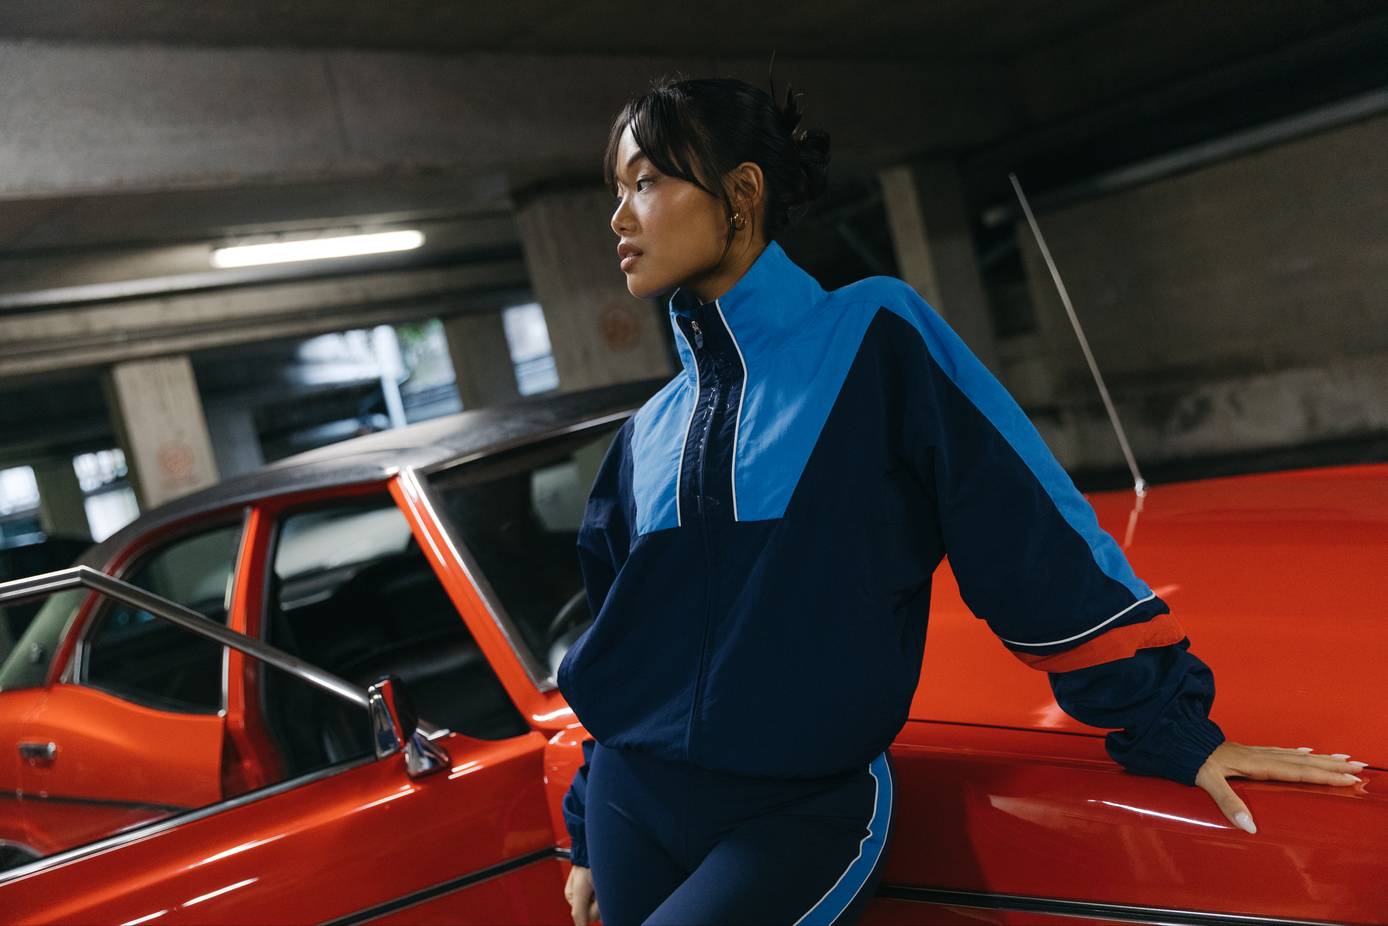 You can now buy cult activewear brand TALA on ASOS